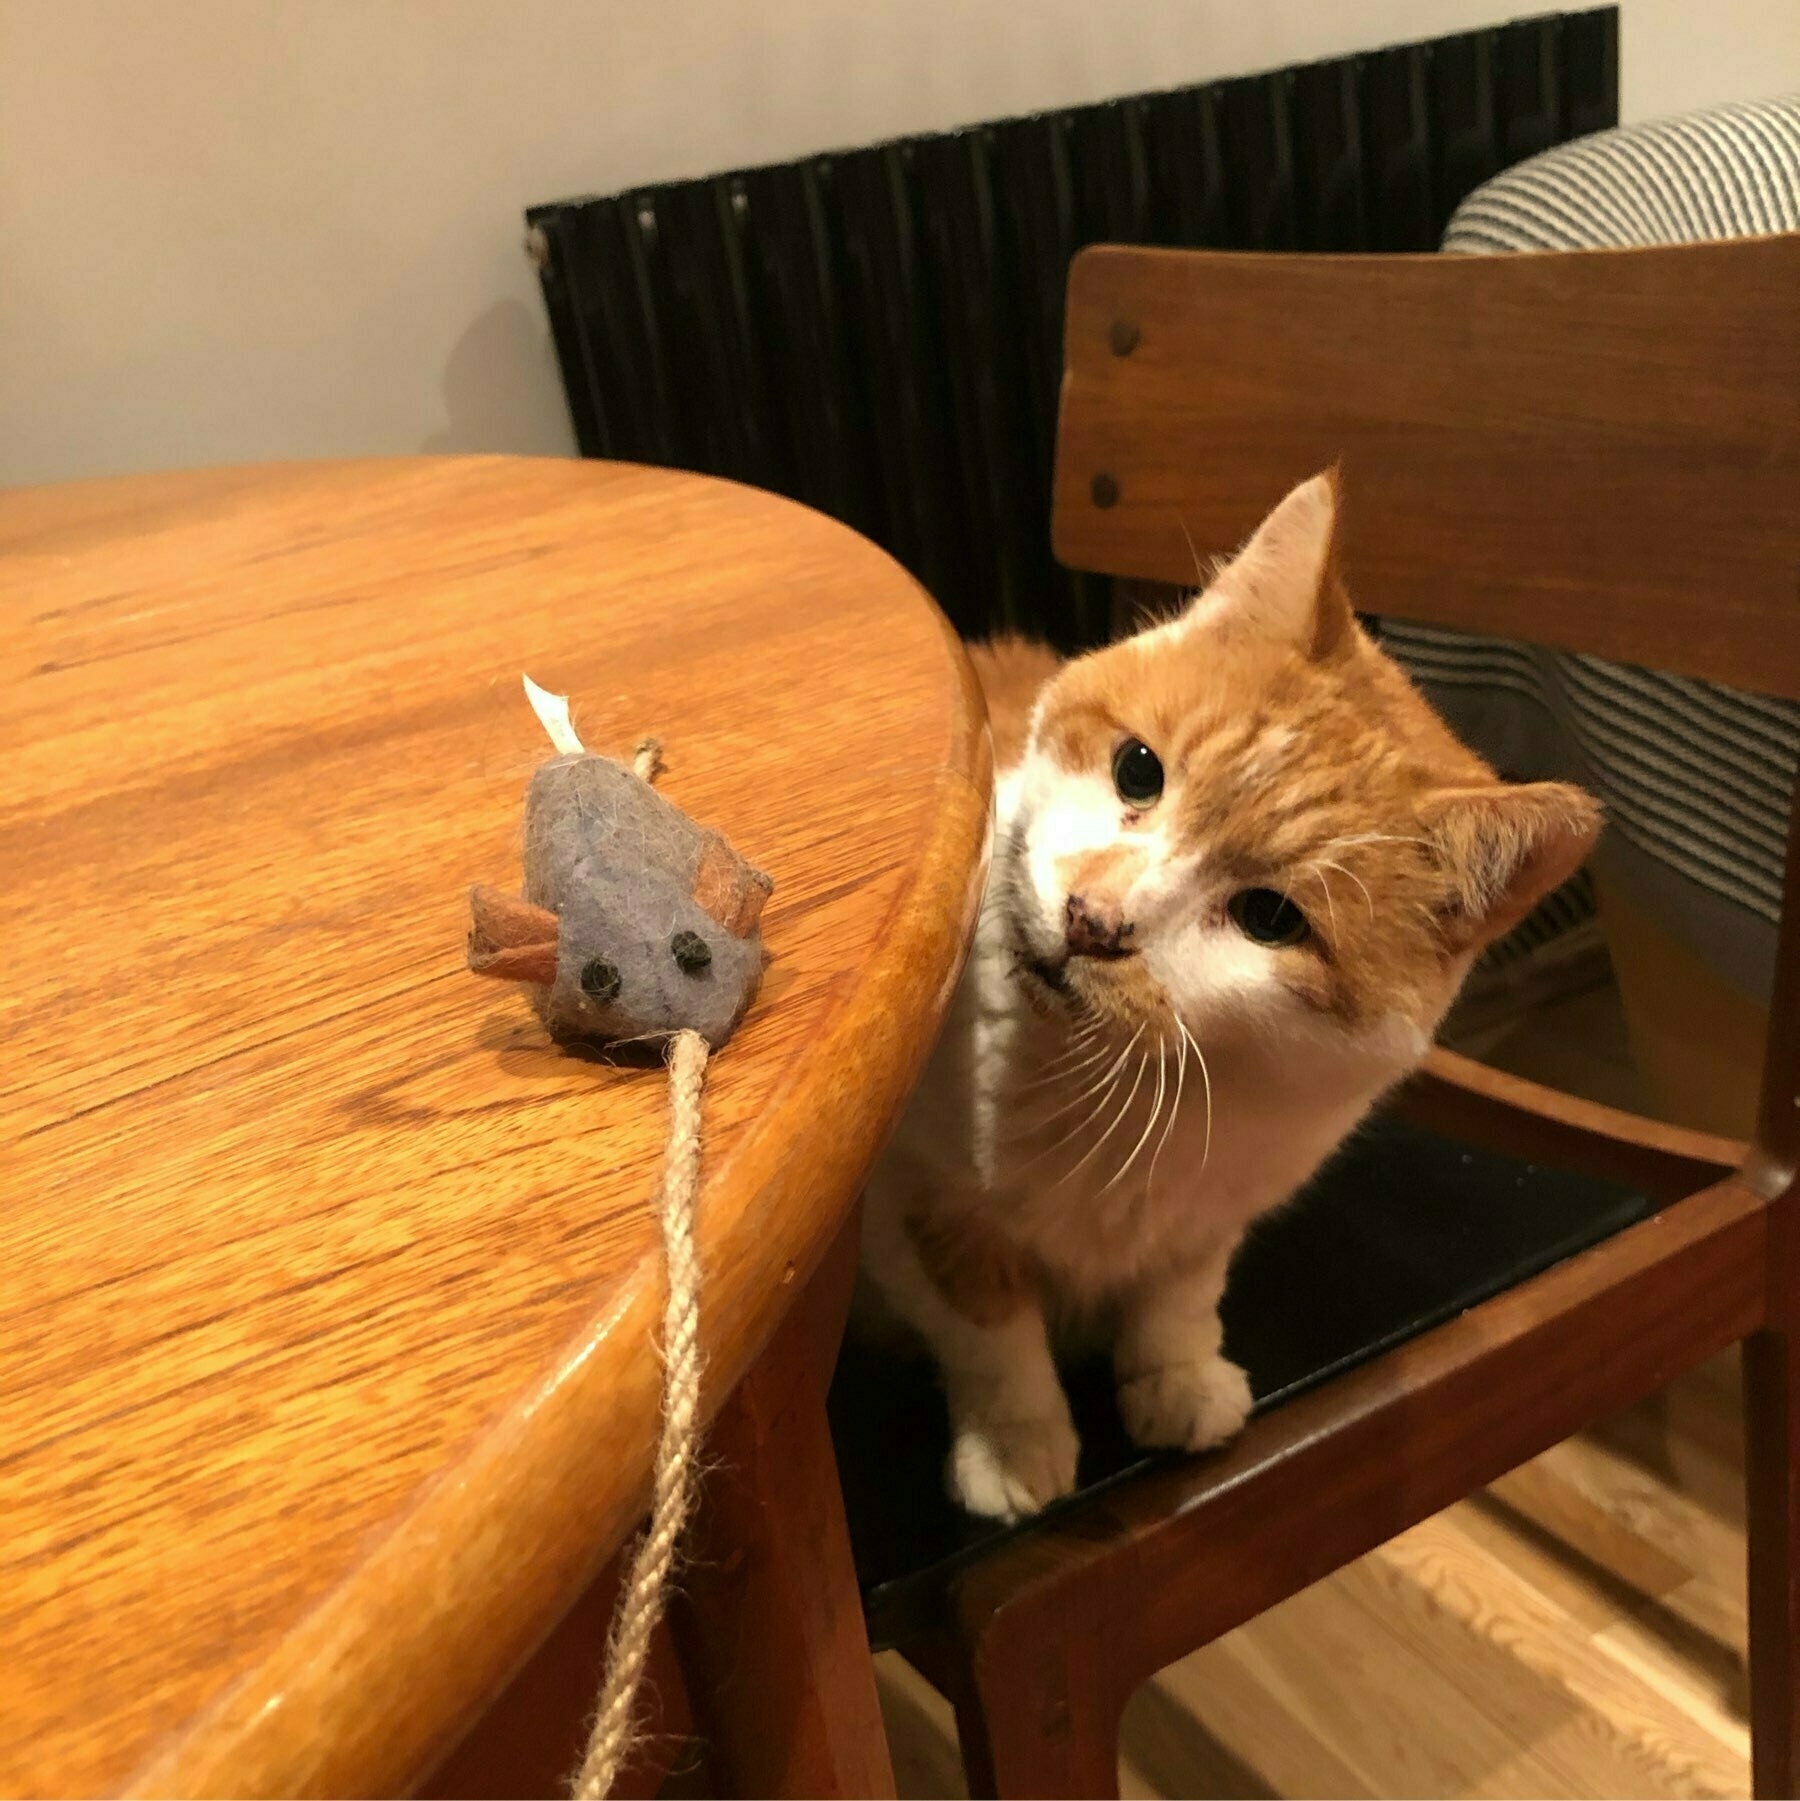 skippy and toy mouse